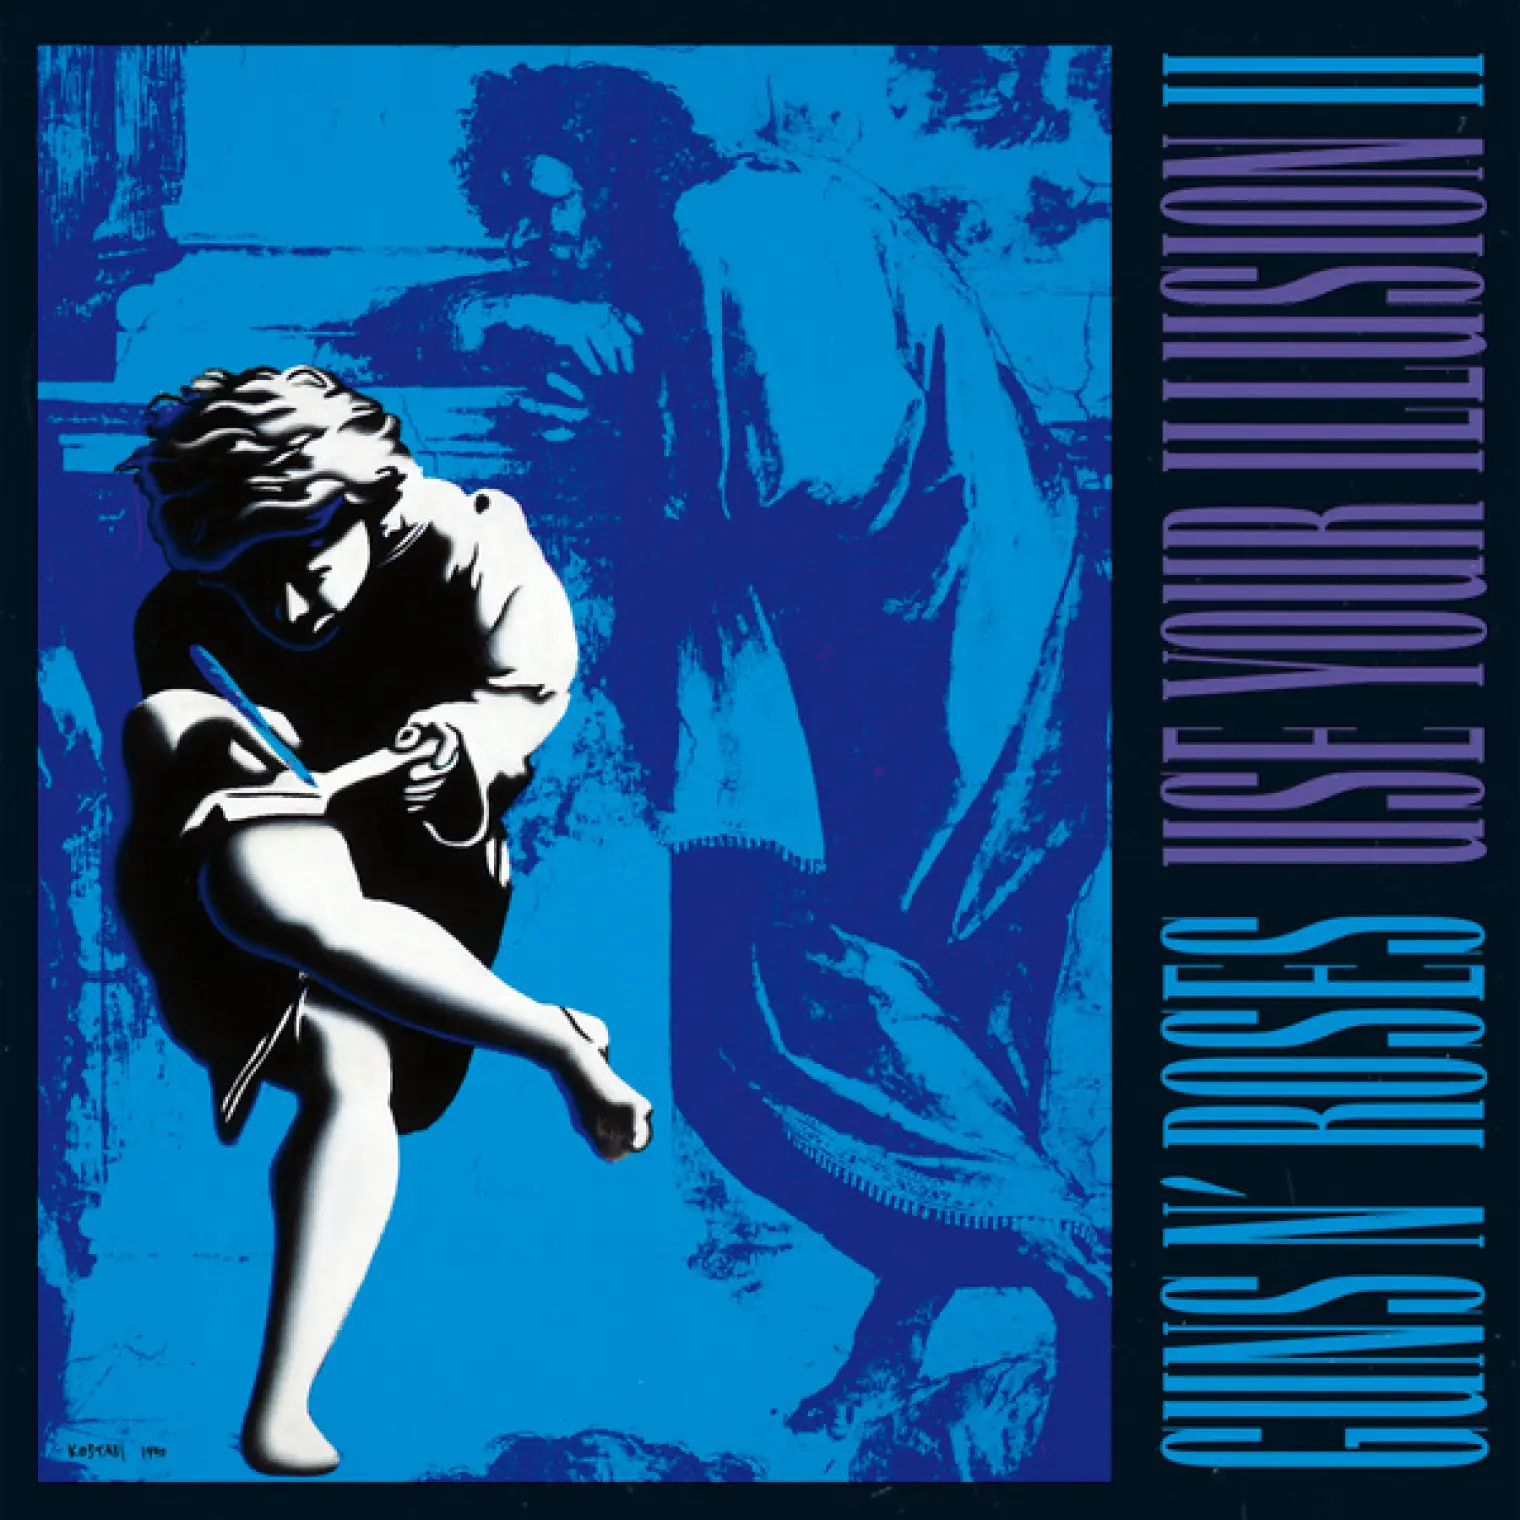 Use Your Illusion II (Explicit Version) -  Guns N' Roses 